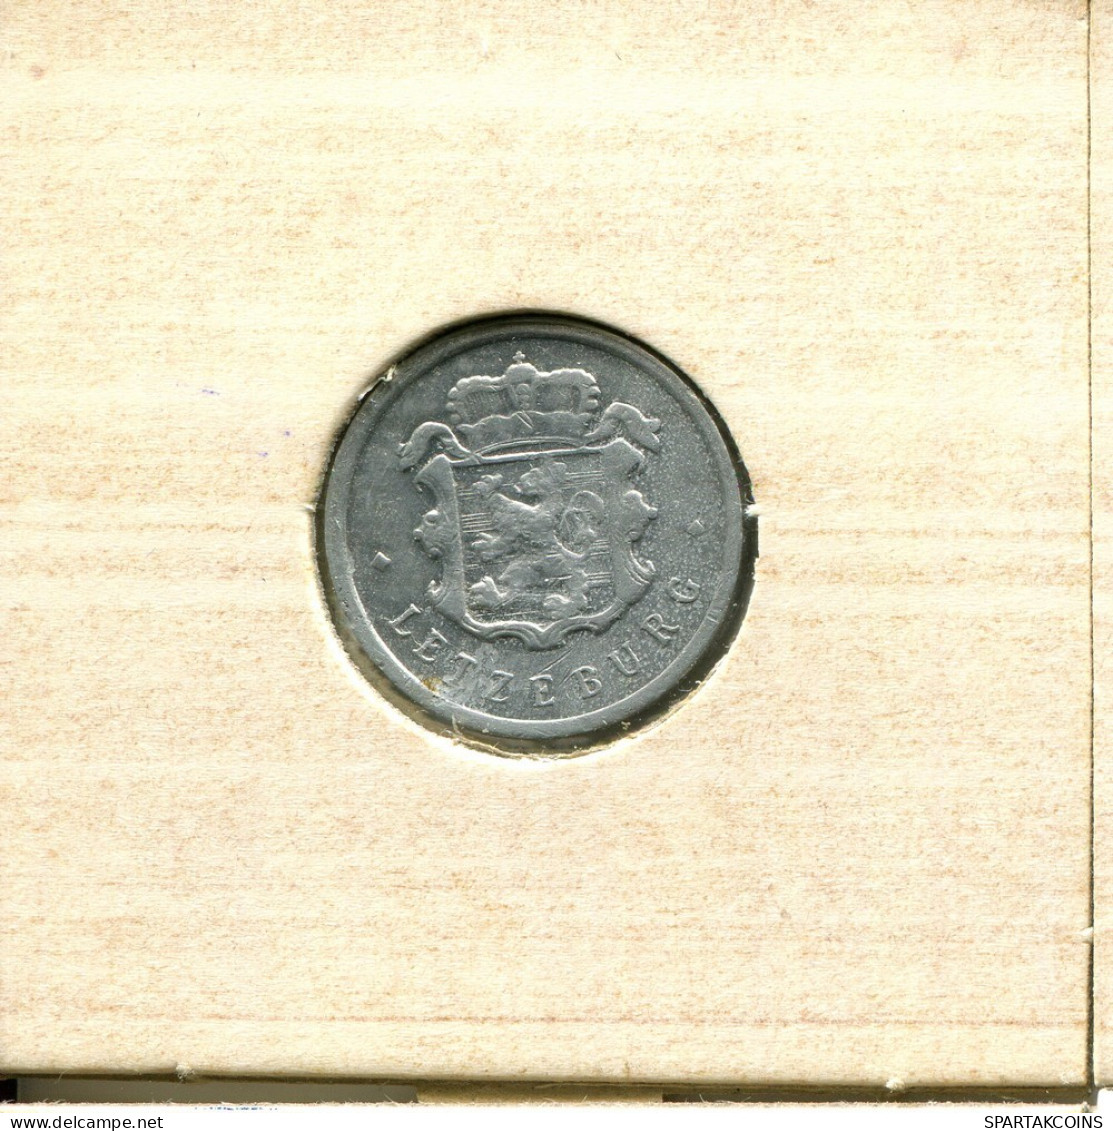 25 CENTIMES 1960 LUXEMBOURG Coin #AT191.U.A - Luxemburg